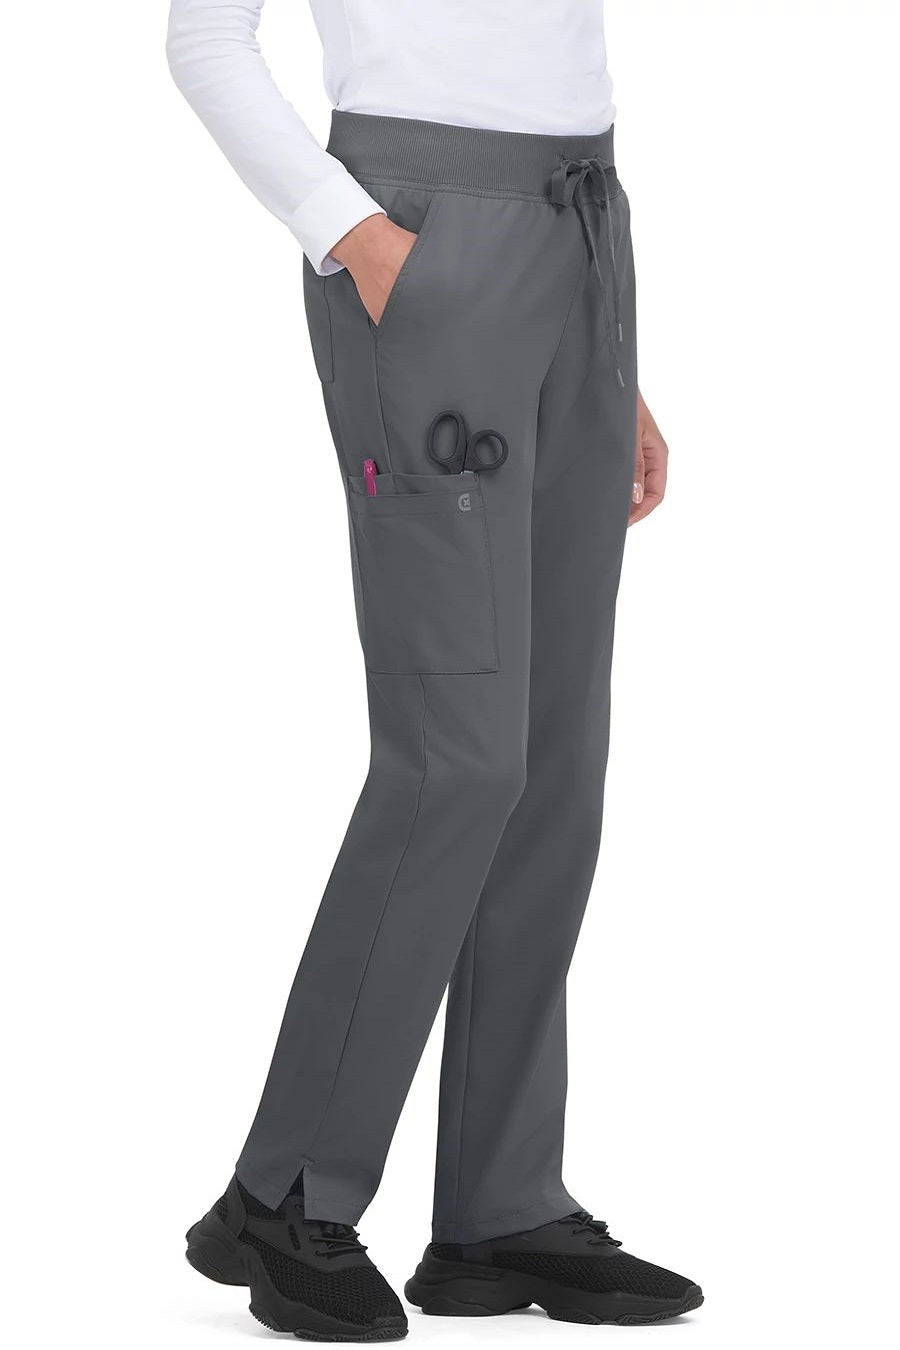 koi Scrub Pants Cureology Atria in Pewter at Parker's Clothing and Shoes.